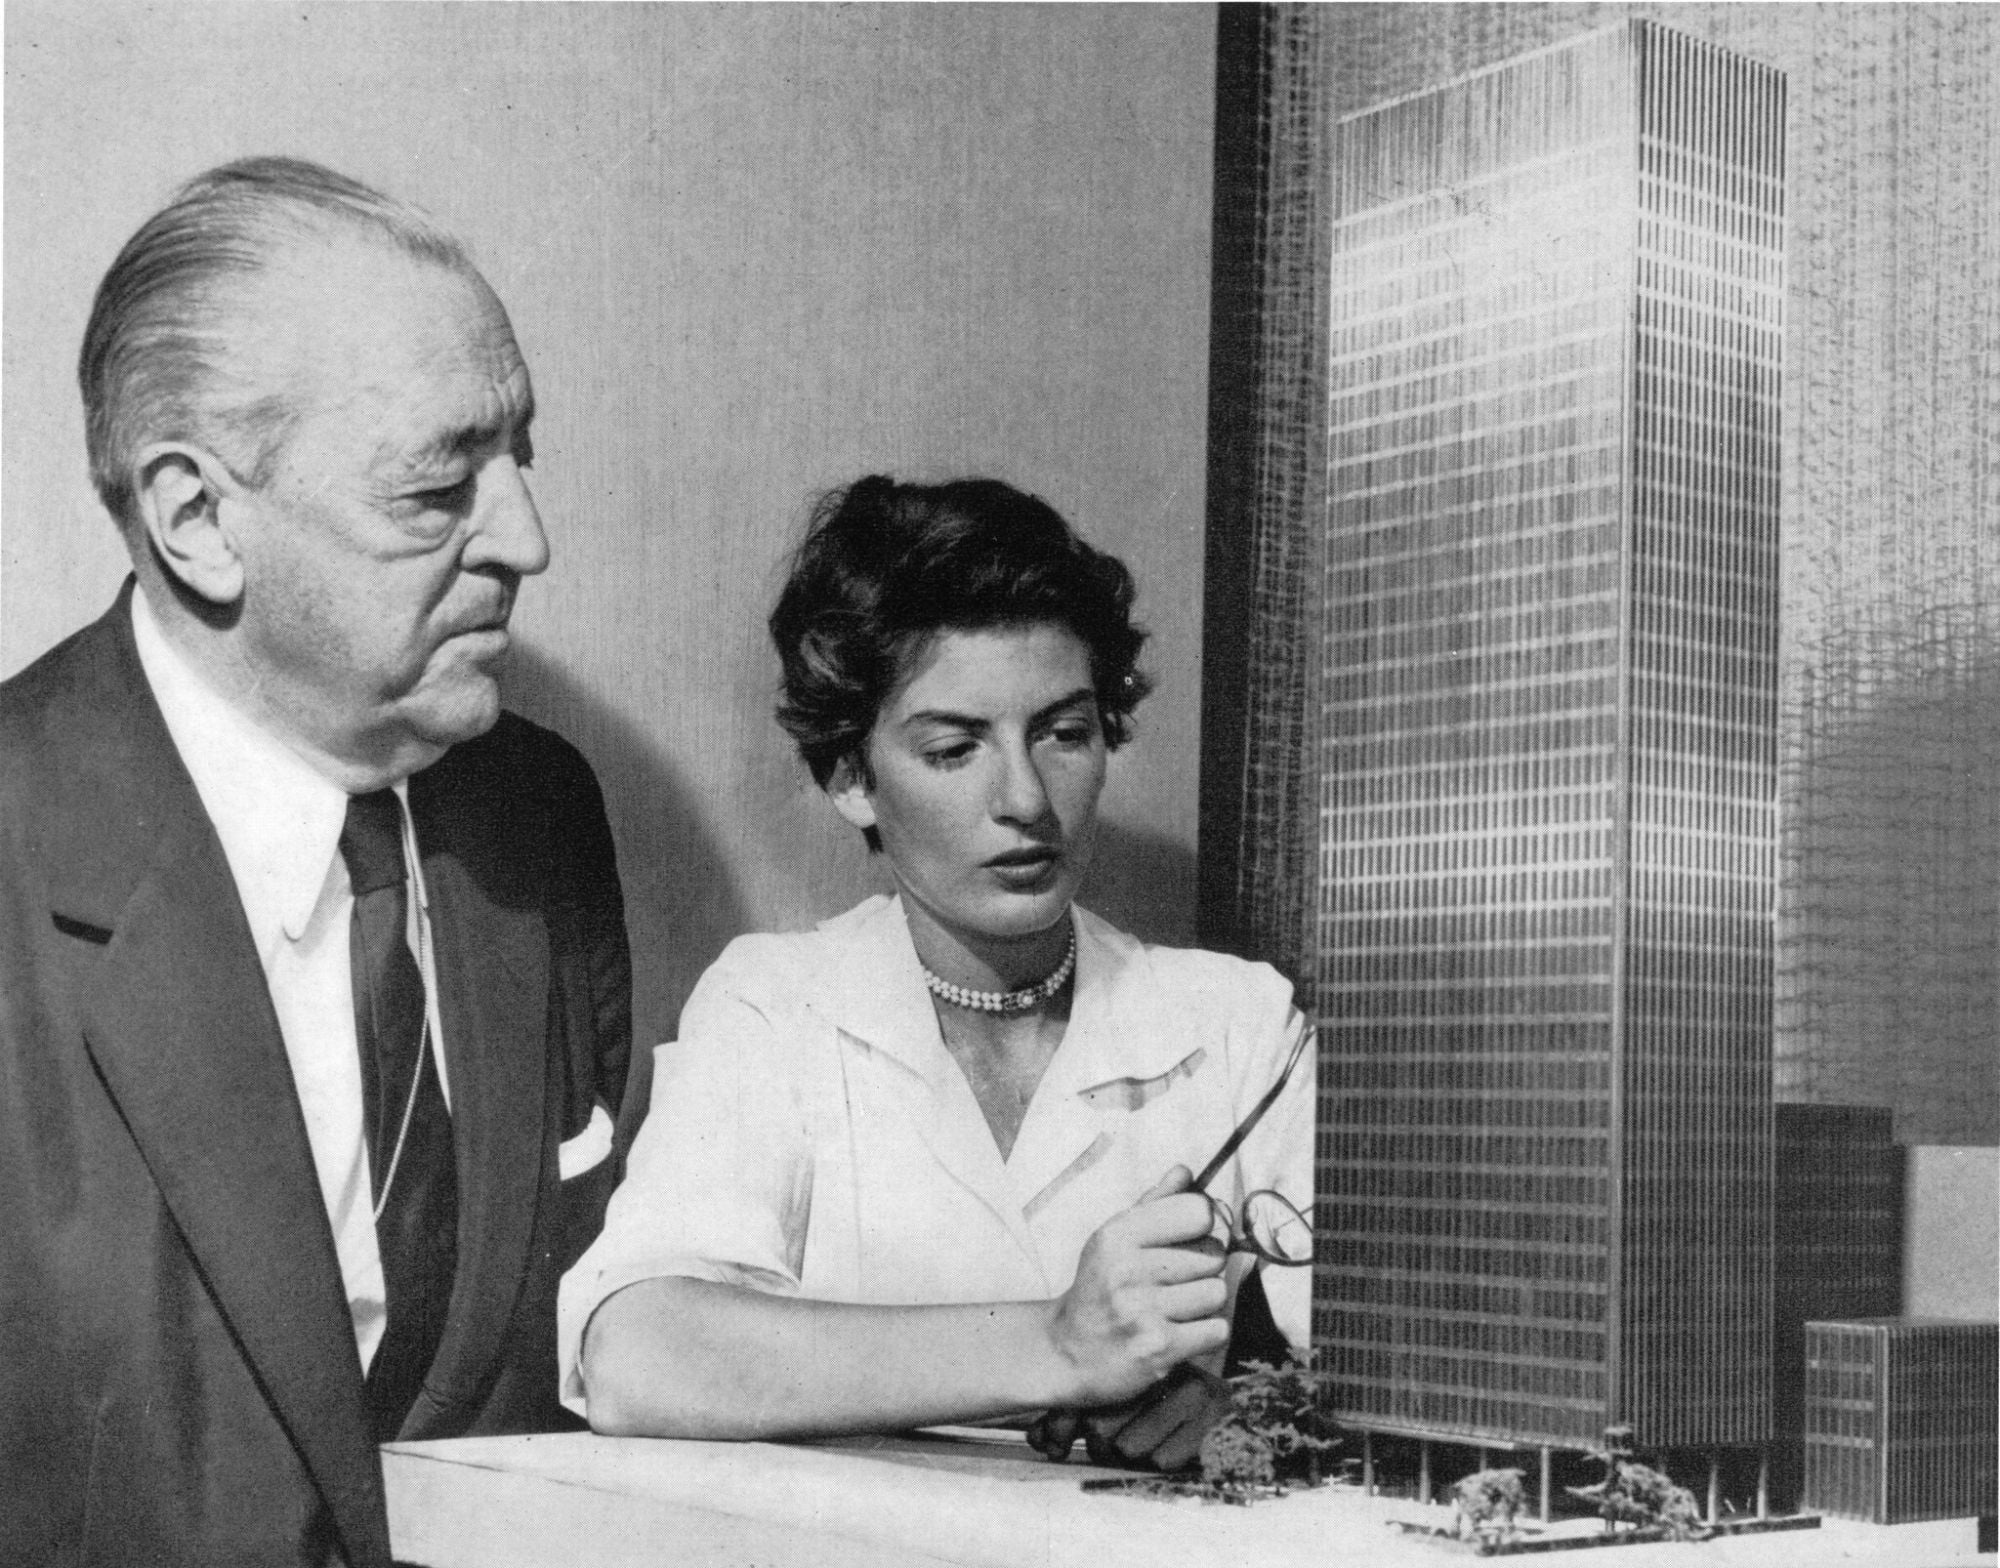 Architects Phyllis Lambert and Ludwig Mies van der Rohe work together on a project. 